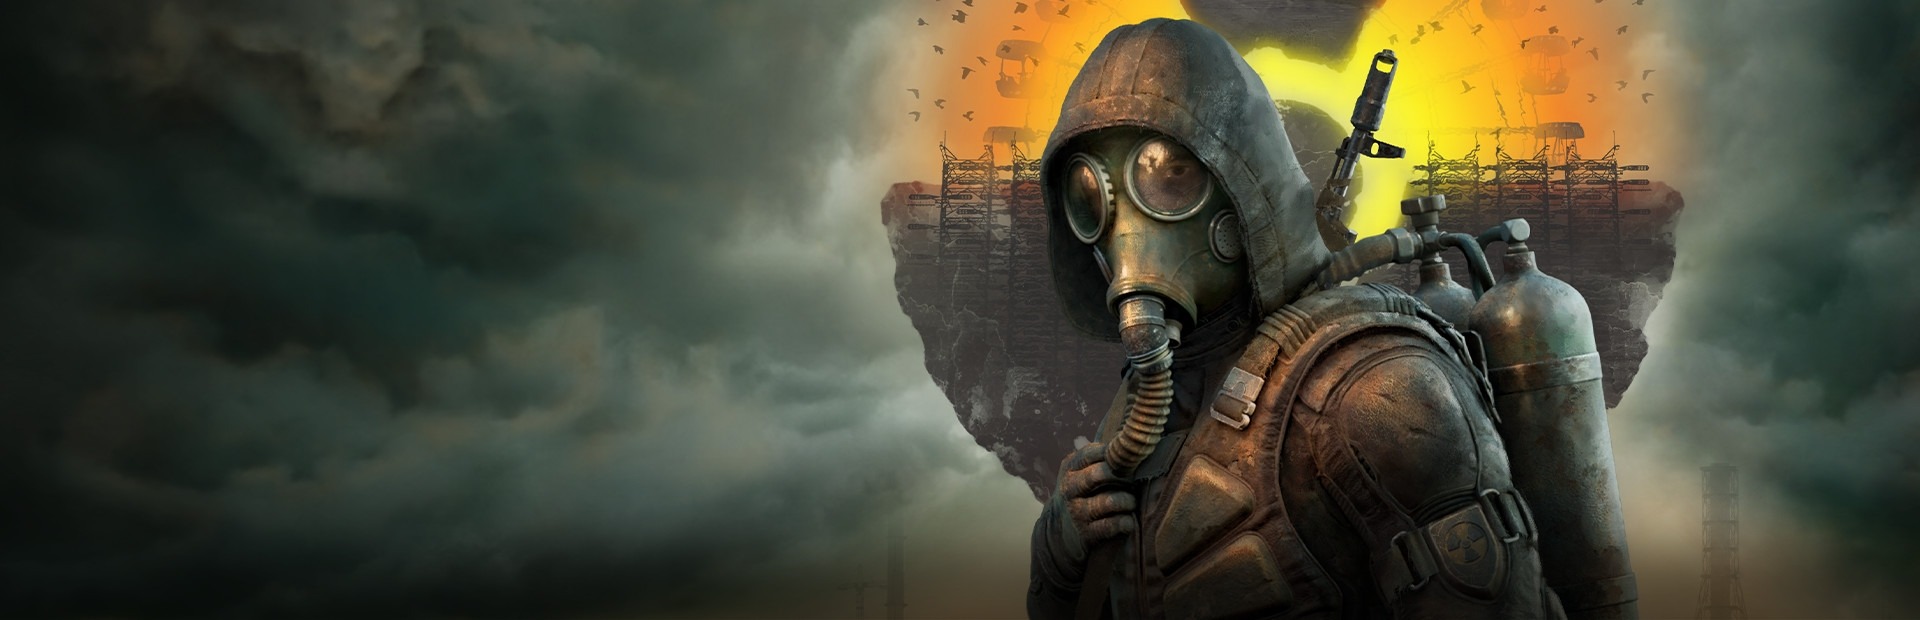 Banner S.T.A.L.K.E.R. 2: Heart of Chornobyl - Ultimate Edition